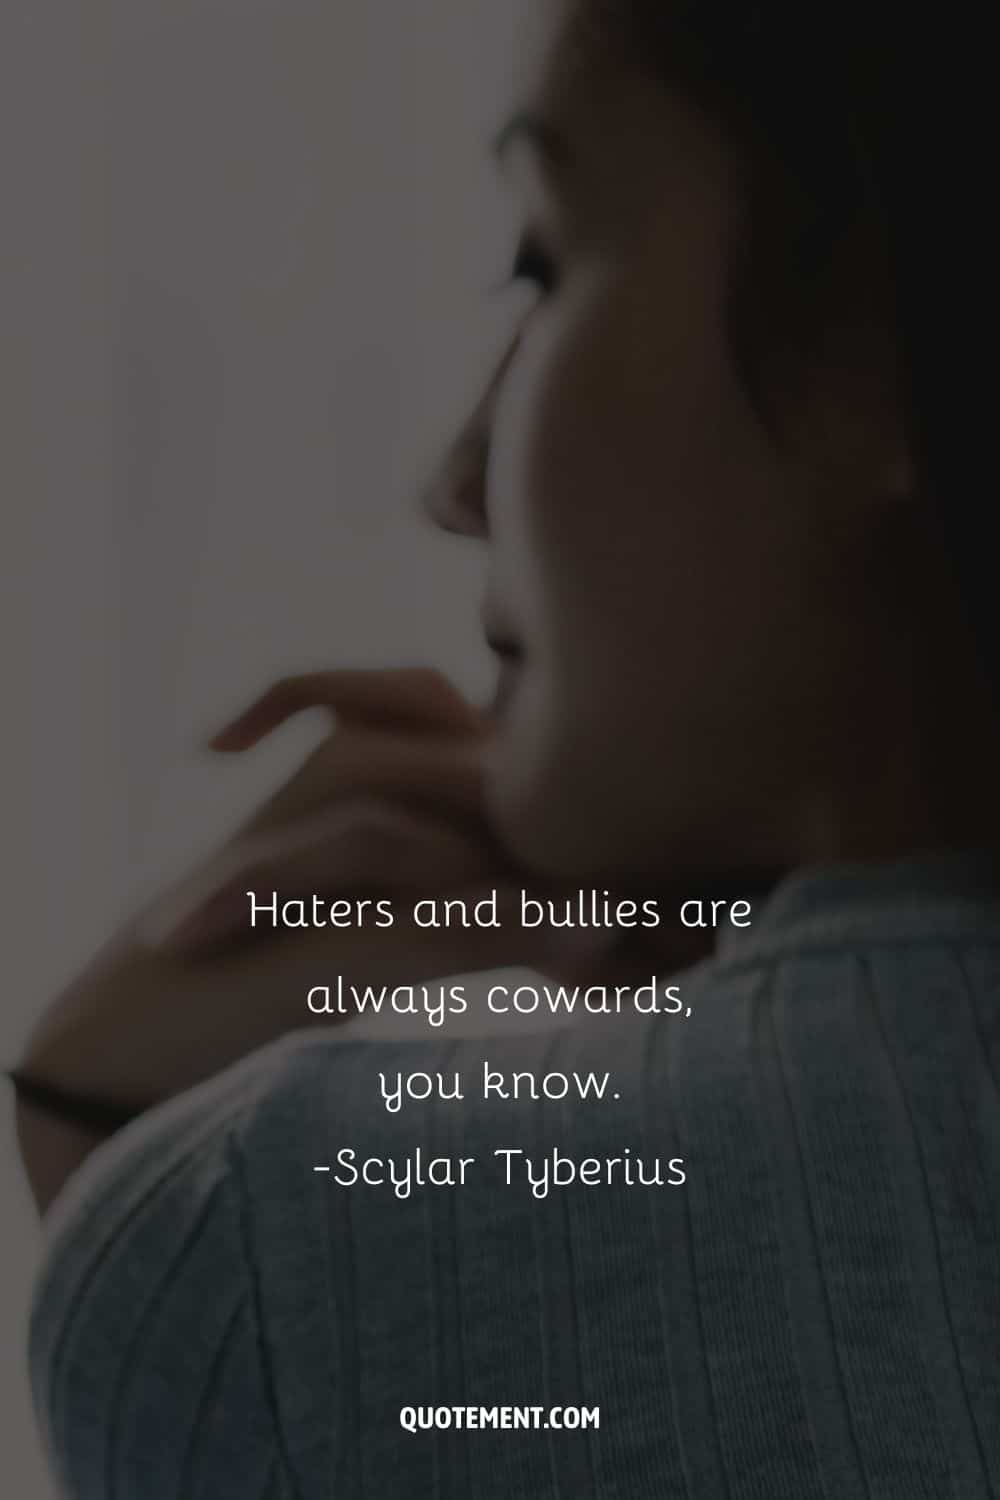 Haters and bullies are always cowards, you know